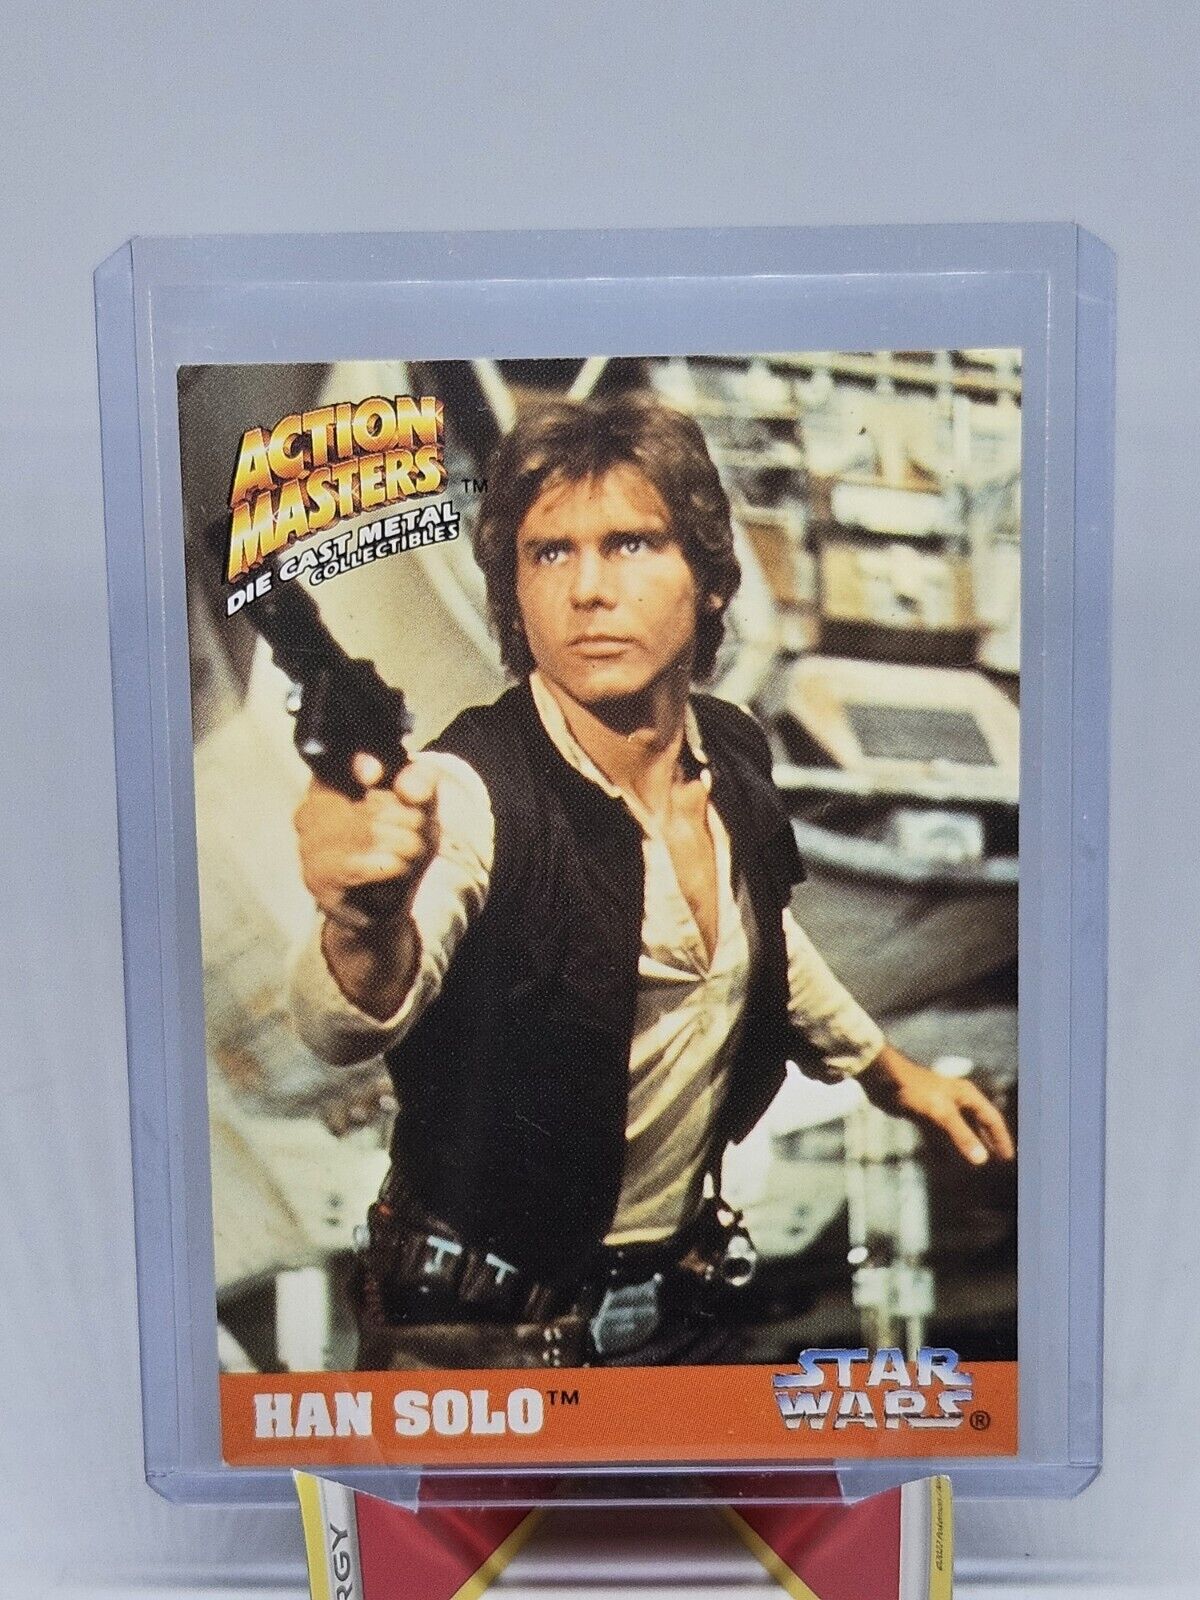 1994 Kenner Star Wars Action Masters Han Solo Card - HASO 1b3 Vintage